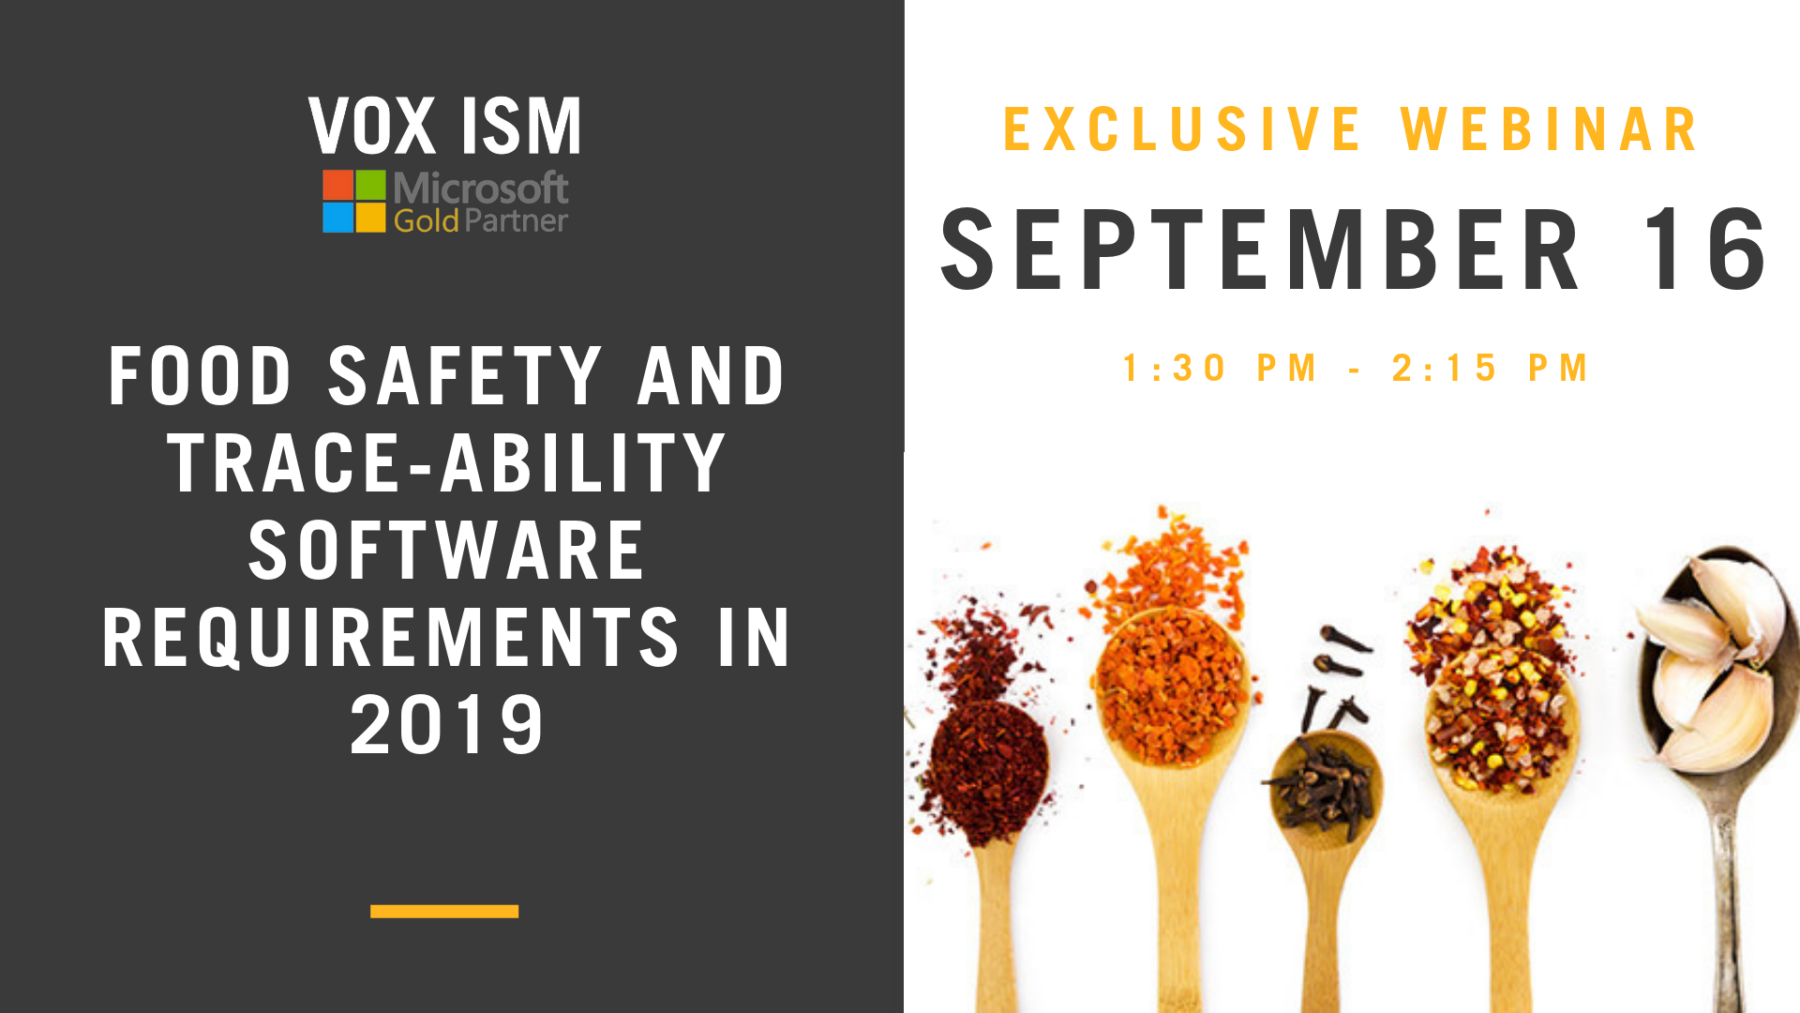 Food Safety and Trace-ability software requirements in 2019 - September 16 - Webinar - VOX ISM